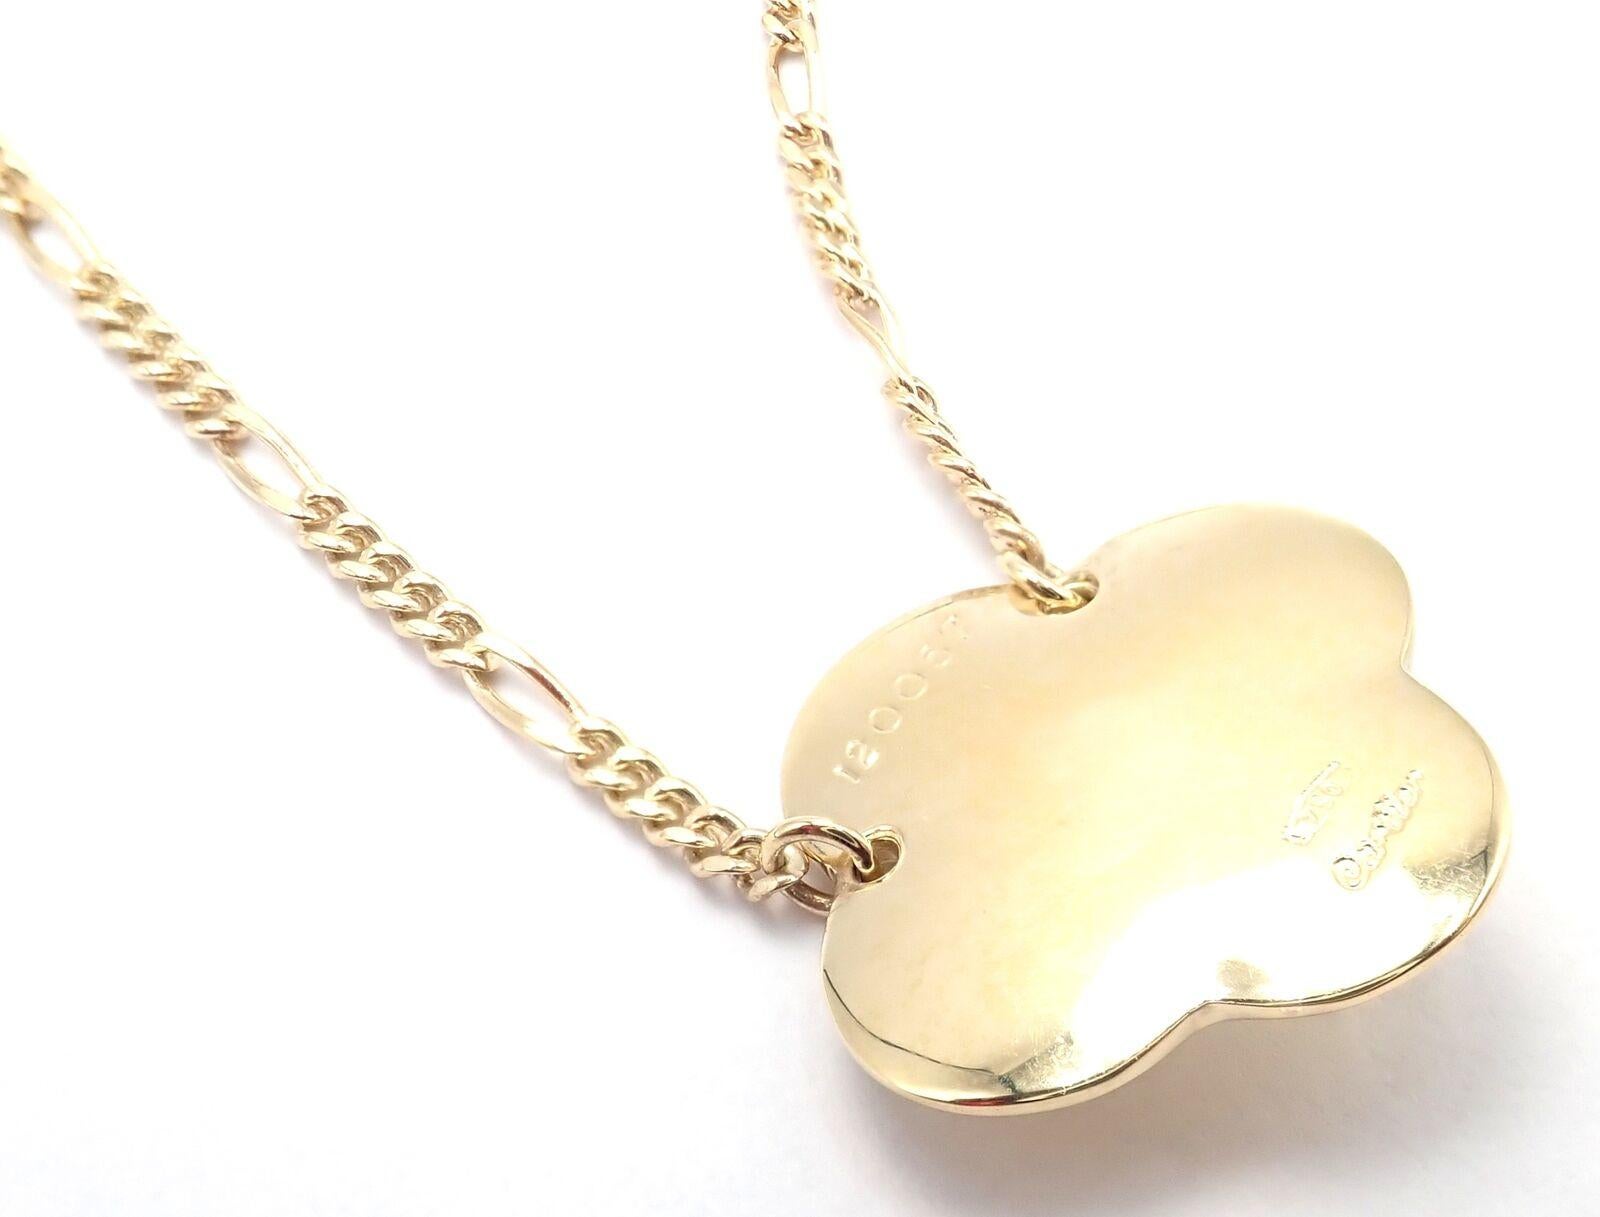 Vintage Cartier Diamond Heart Clover Yellow Gold Pendant Necklace In Excellent Condition For Sale In Holland, PA